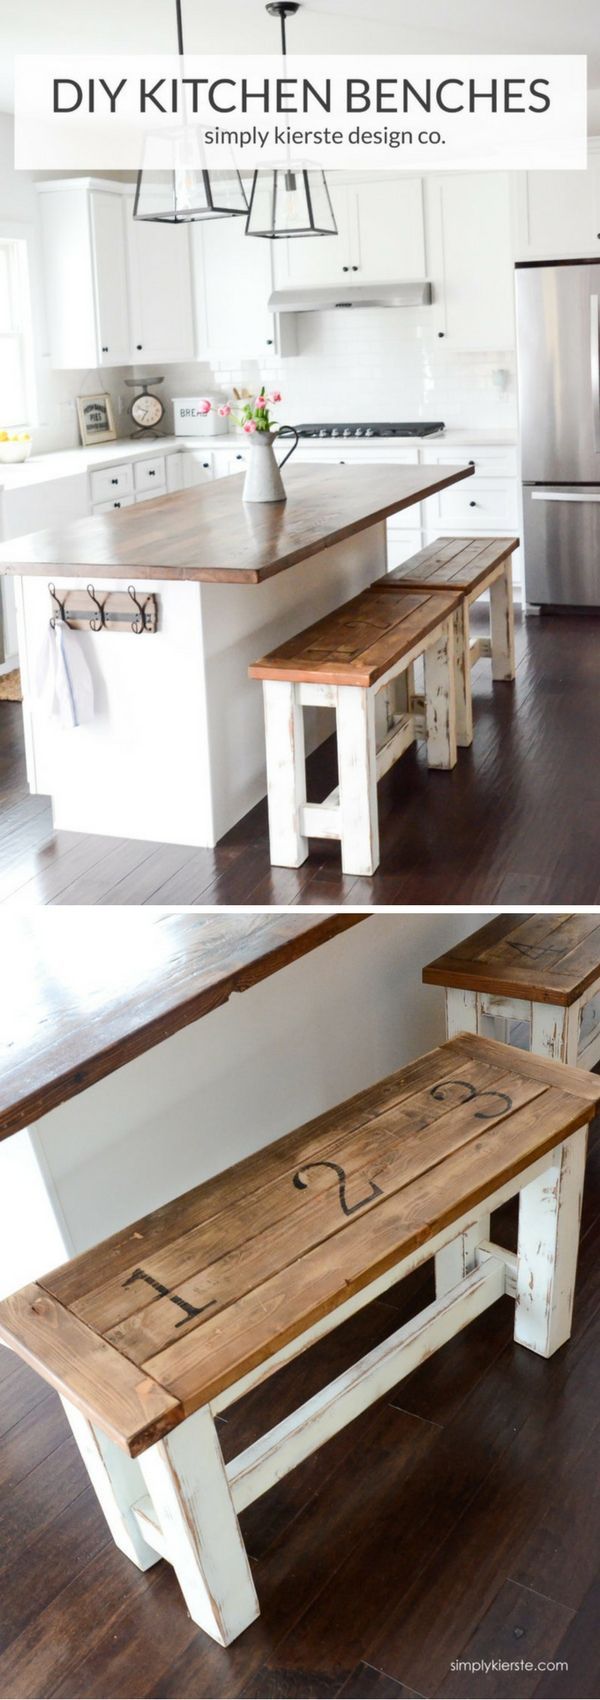 Check out the tutorial on how to make a DIY kitchen bench @istandarddesign